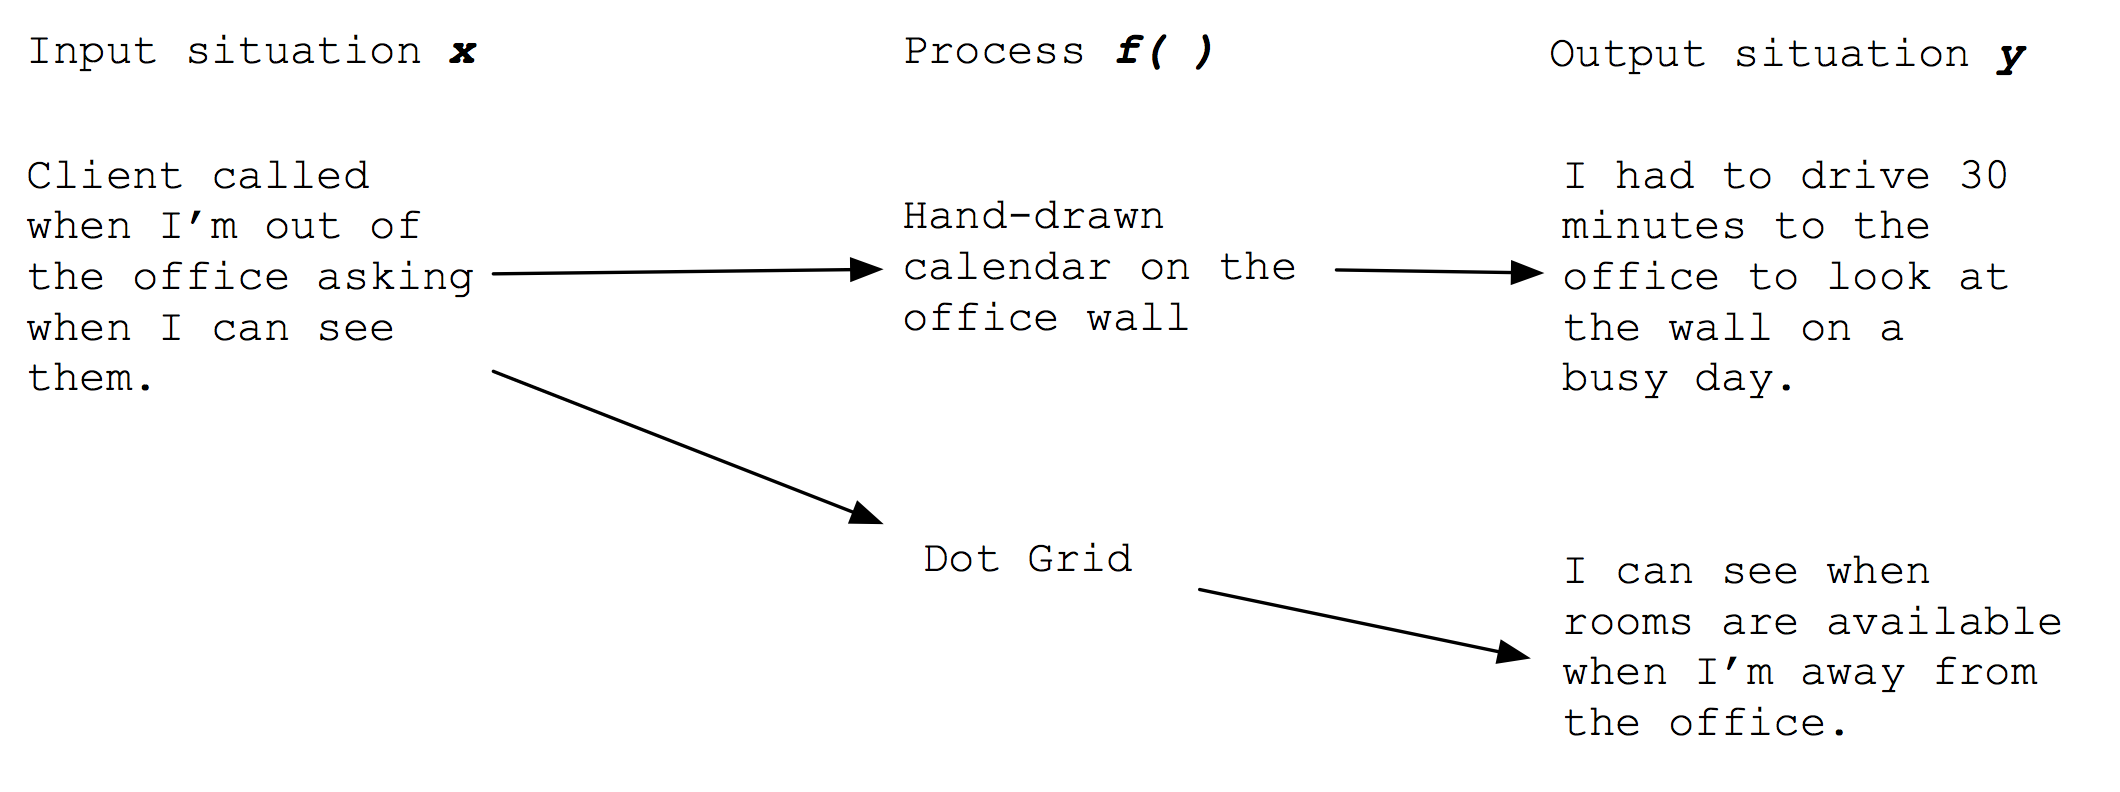 Dot grid taking the place of f()